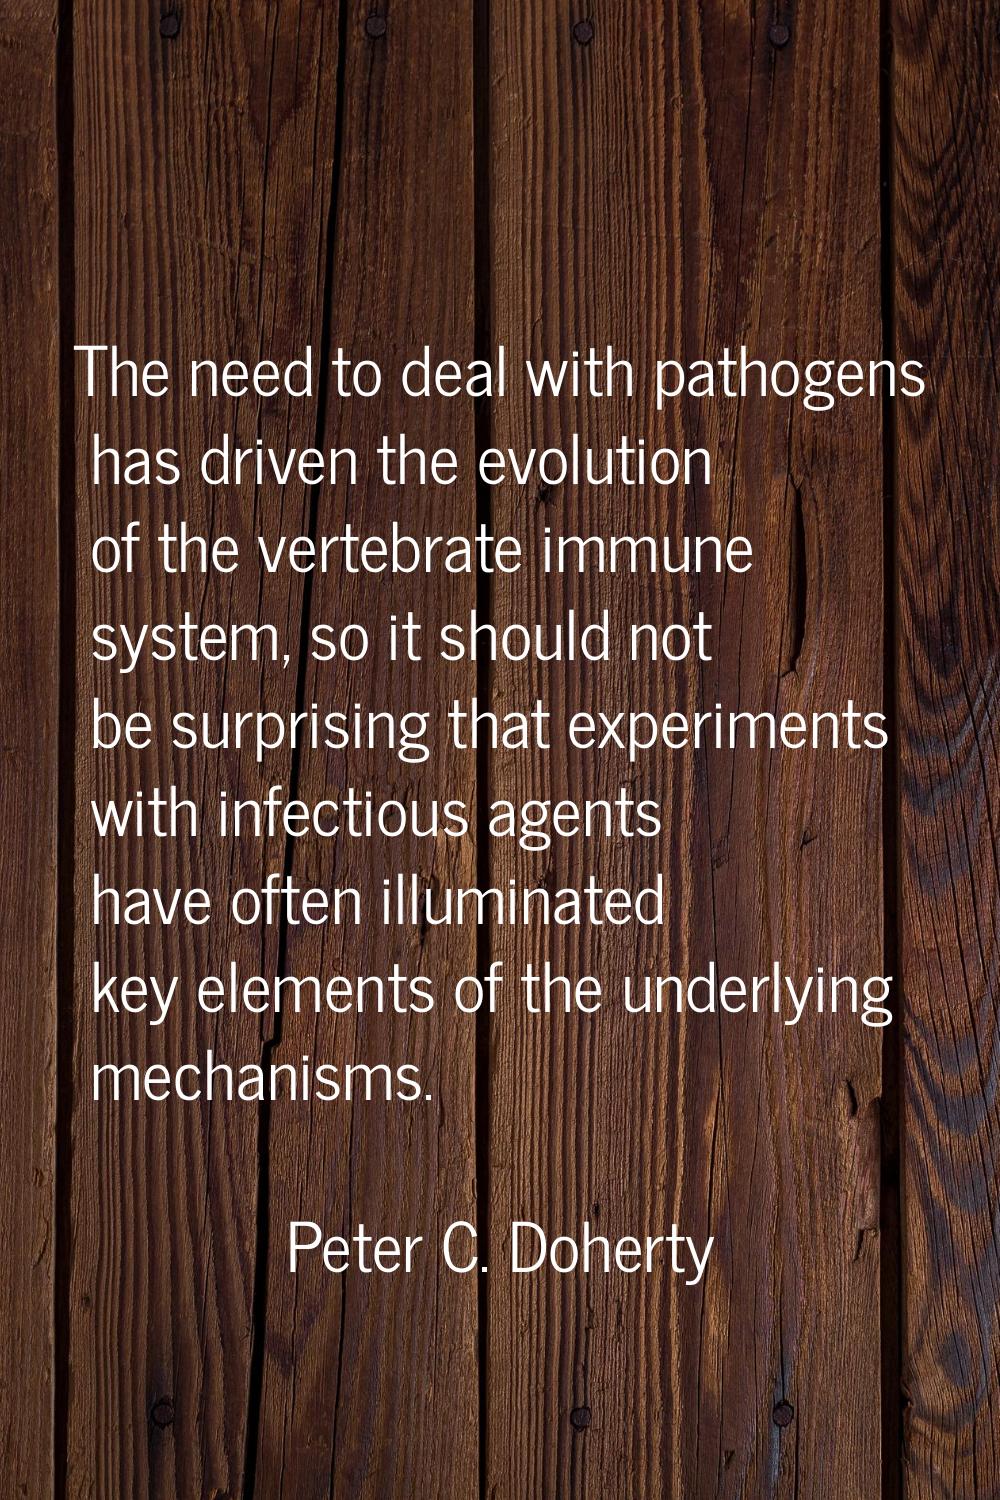 The need to deal with pathogens has driven the evolution of the vertebrate immune system, so it sho